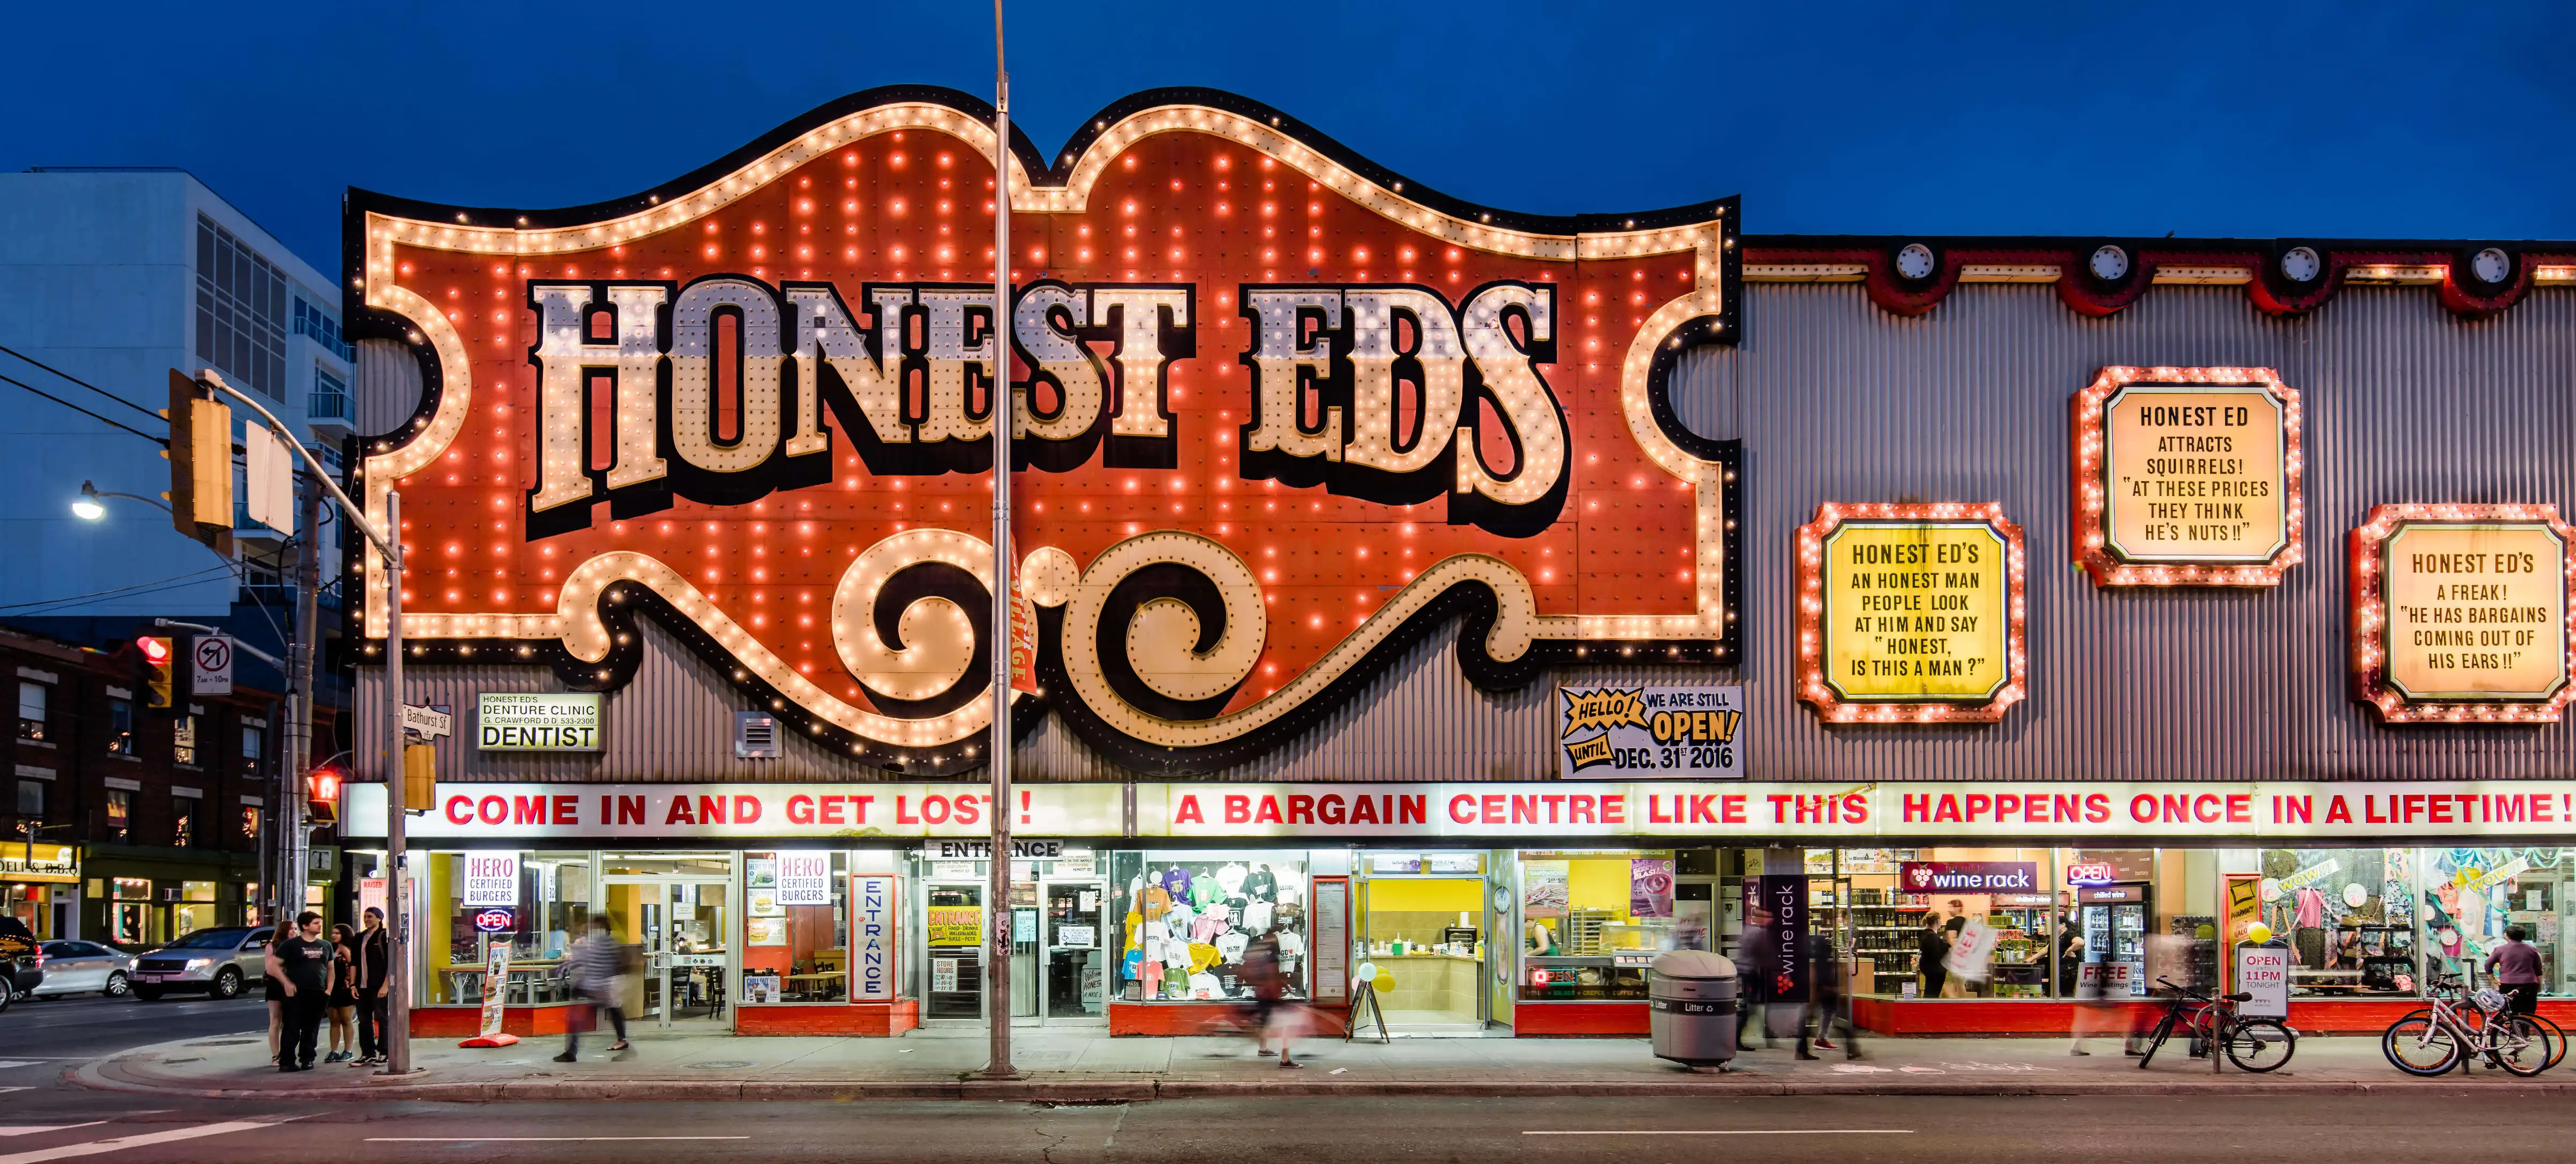 Image of HONEST EDS which is name of a building